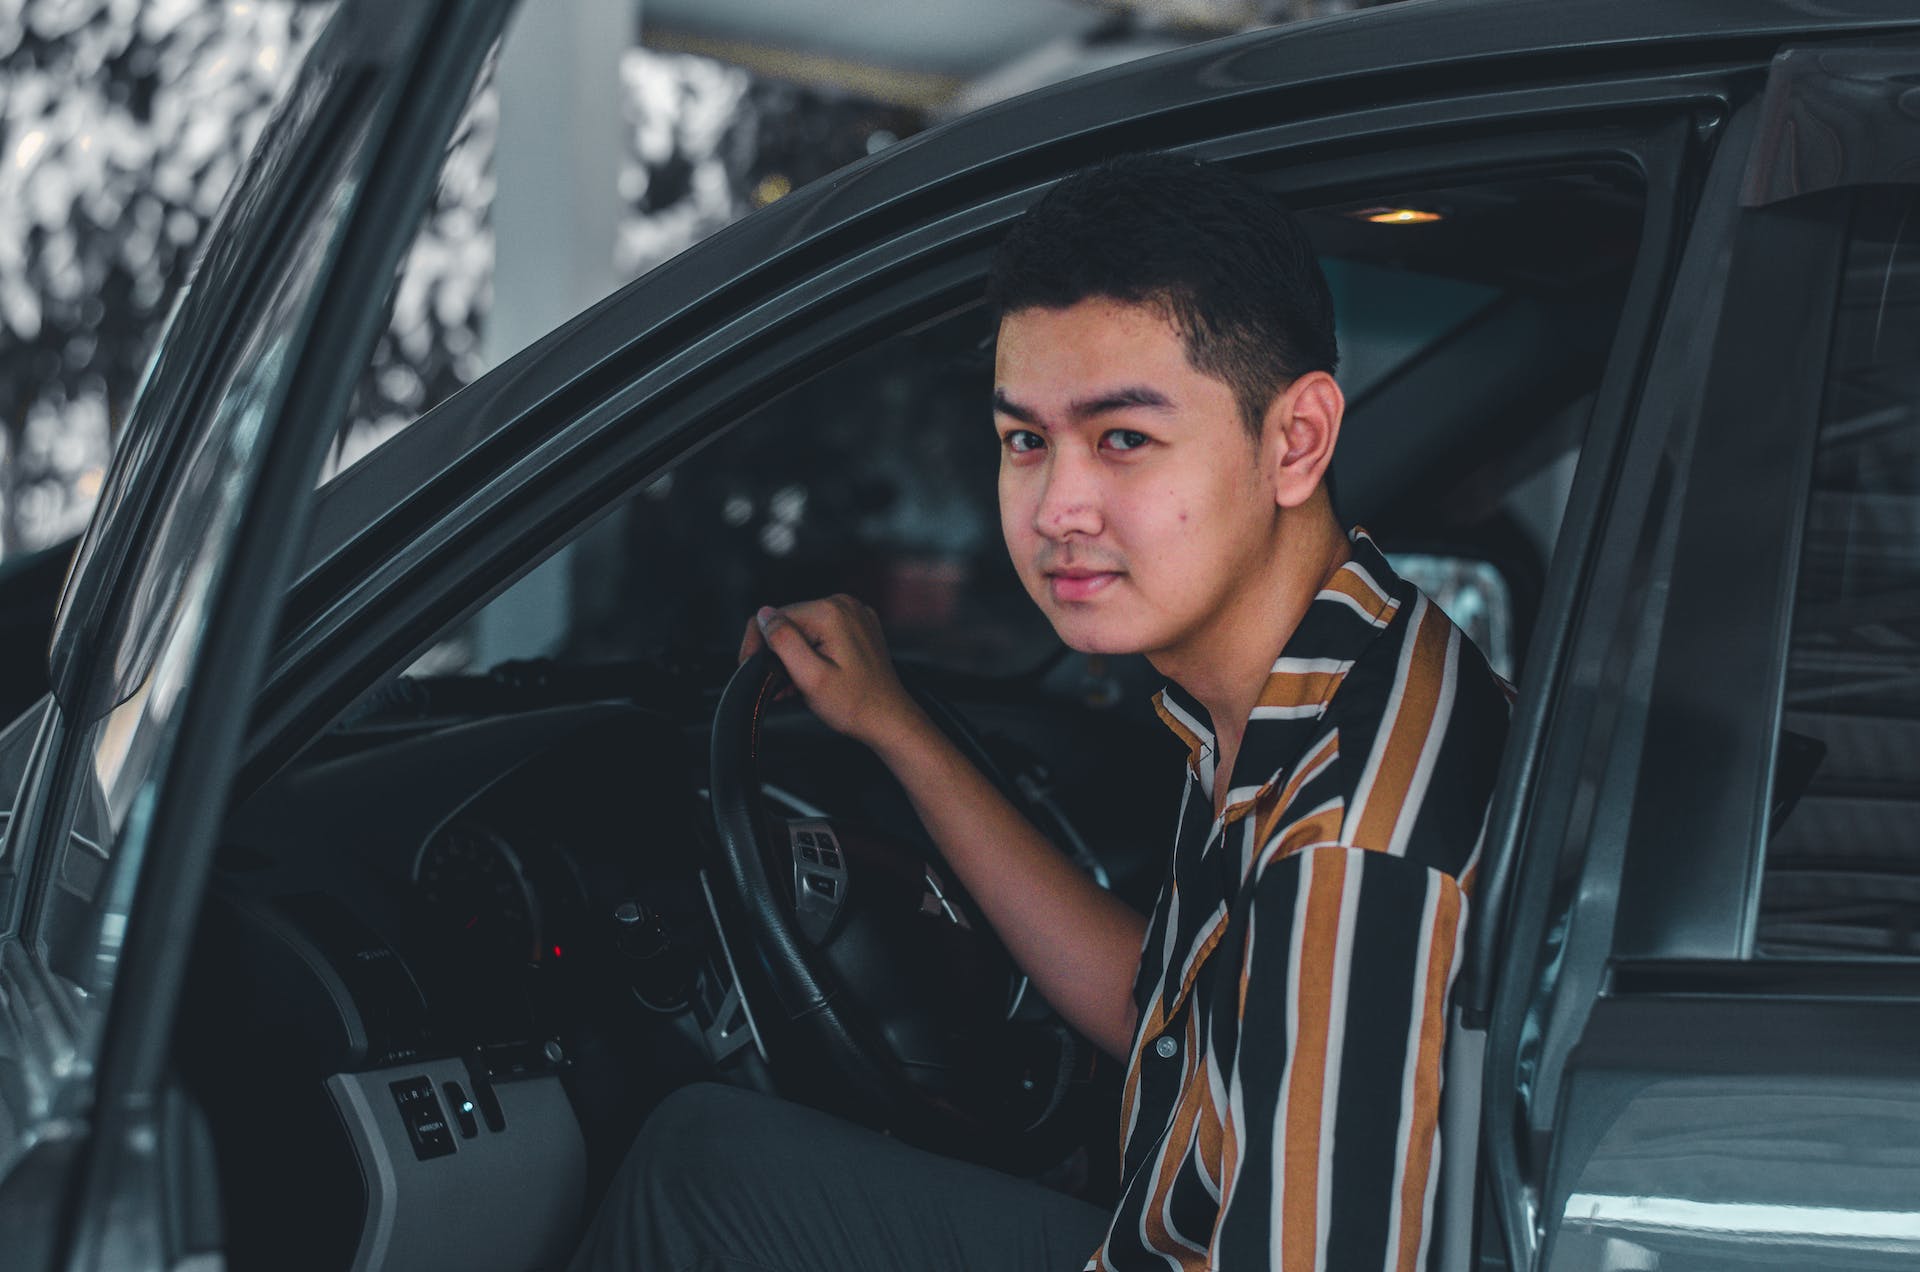 A young man holding a steering wheel | Source: Pexels